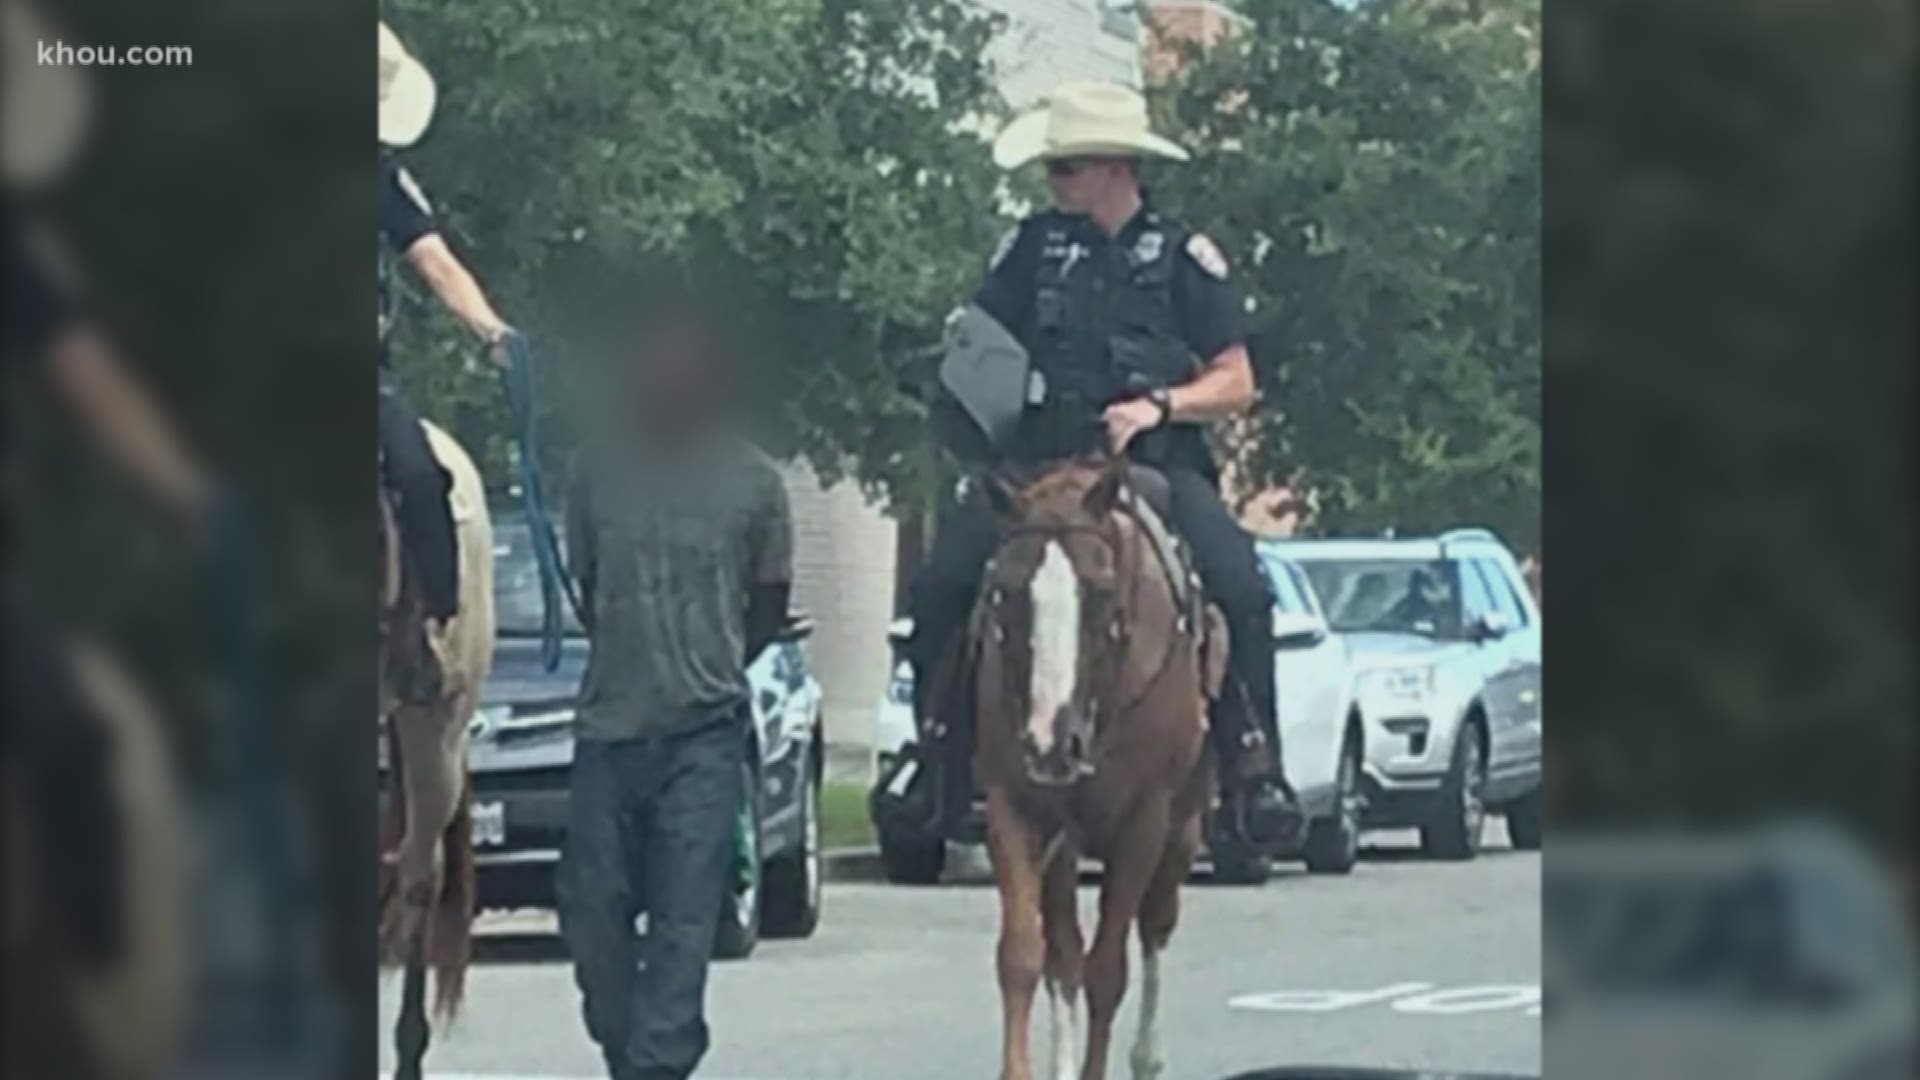 The Galveston Police Department is apologizing for the way officers arrested a man over the weekend in downtown Galveston.